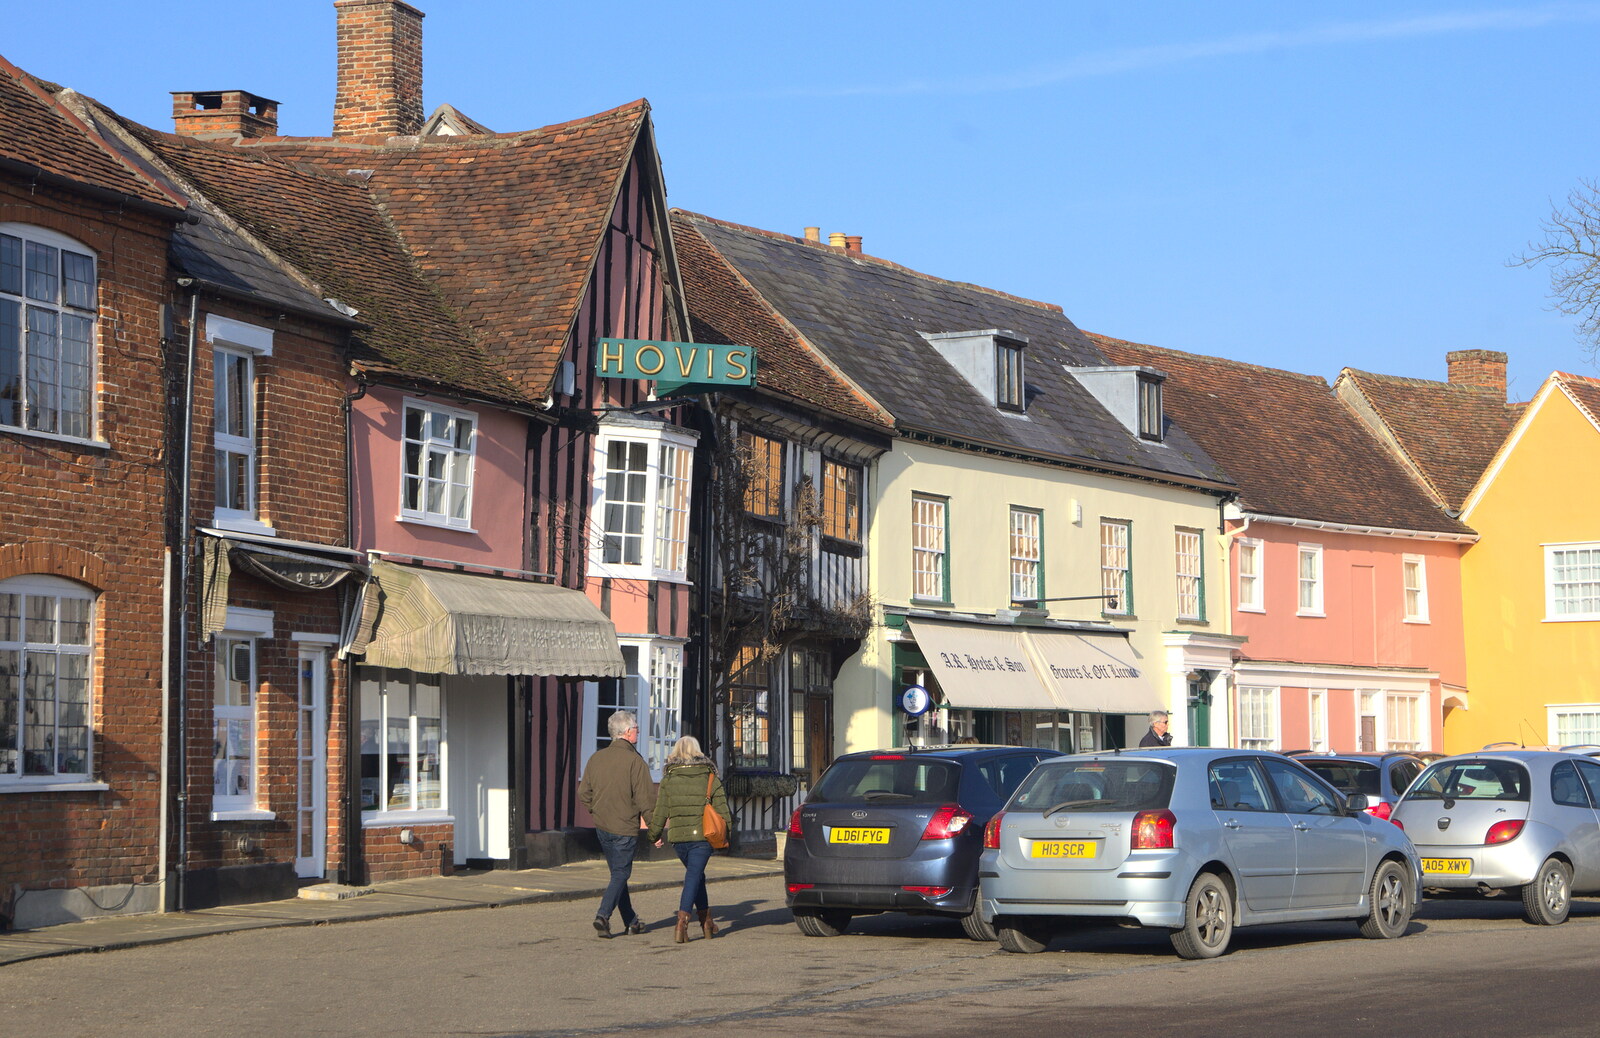 Lavenham's market place from A Day in Lavenham, Suffolk - 22nd January 2017